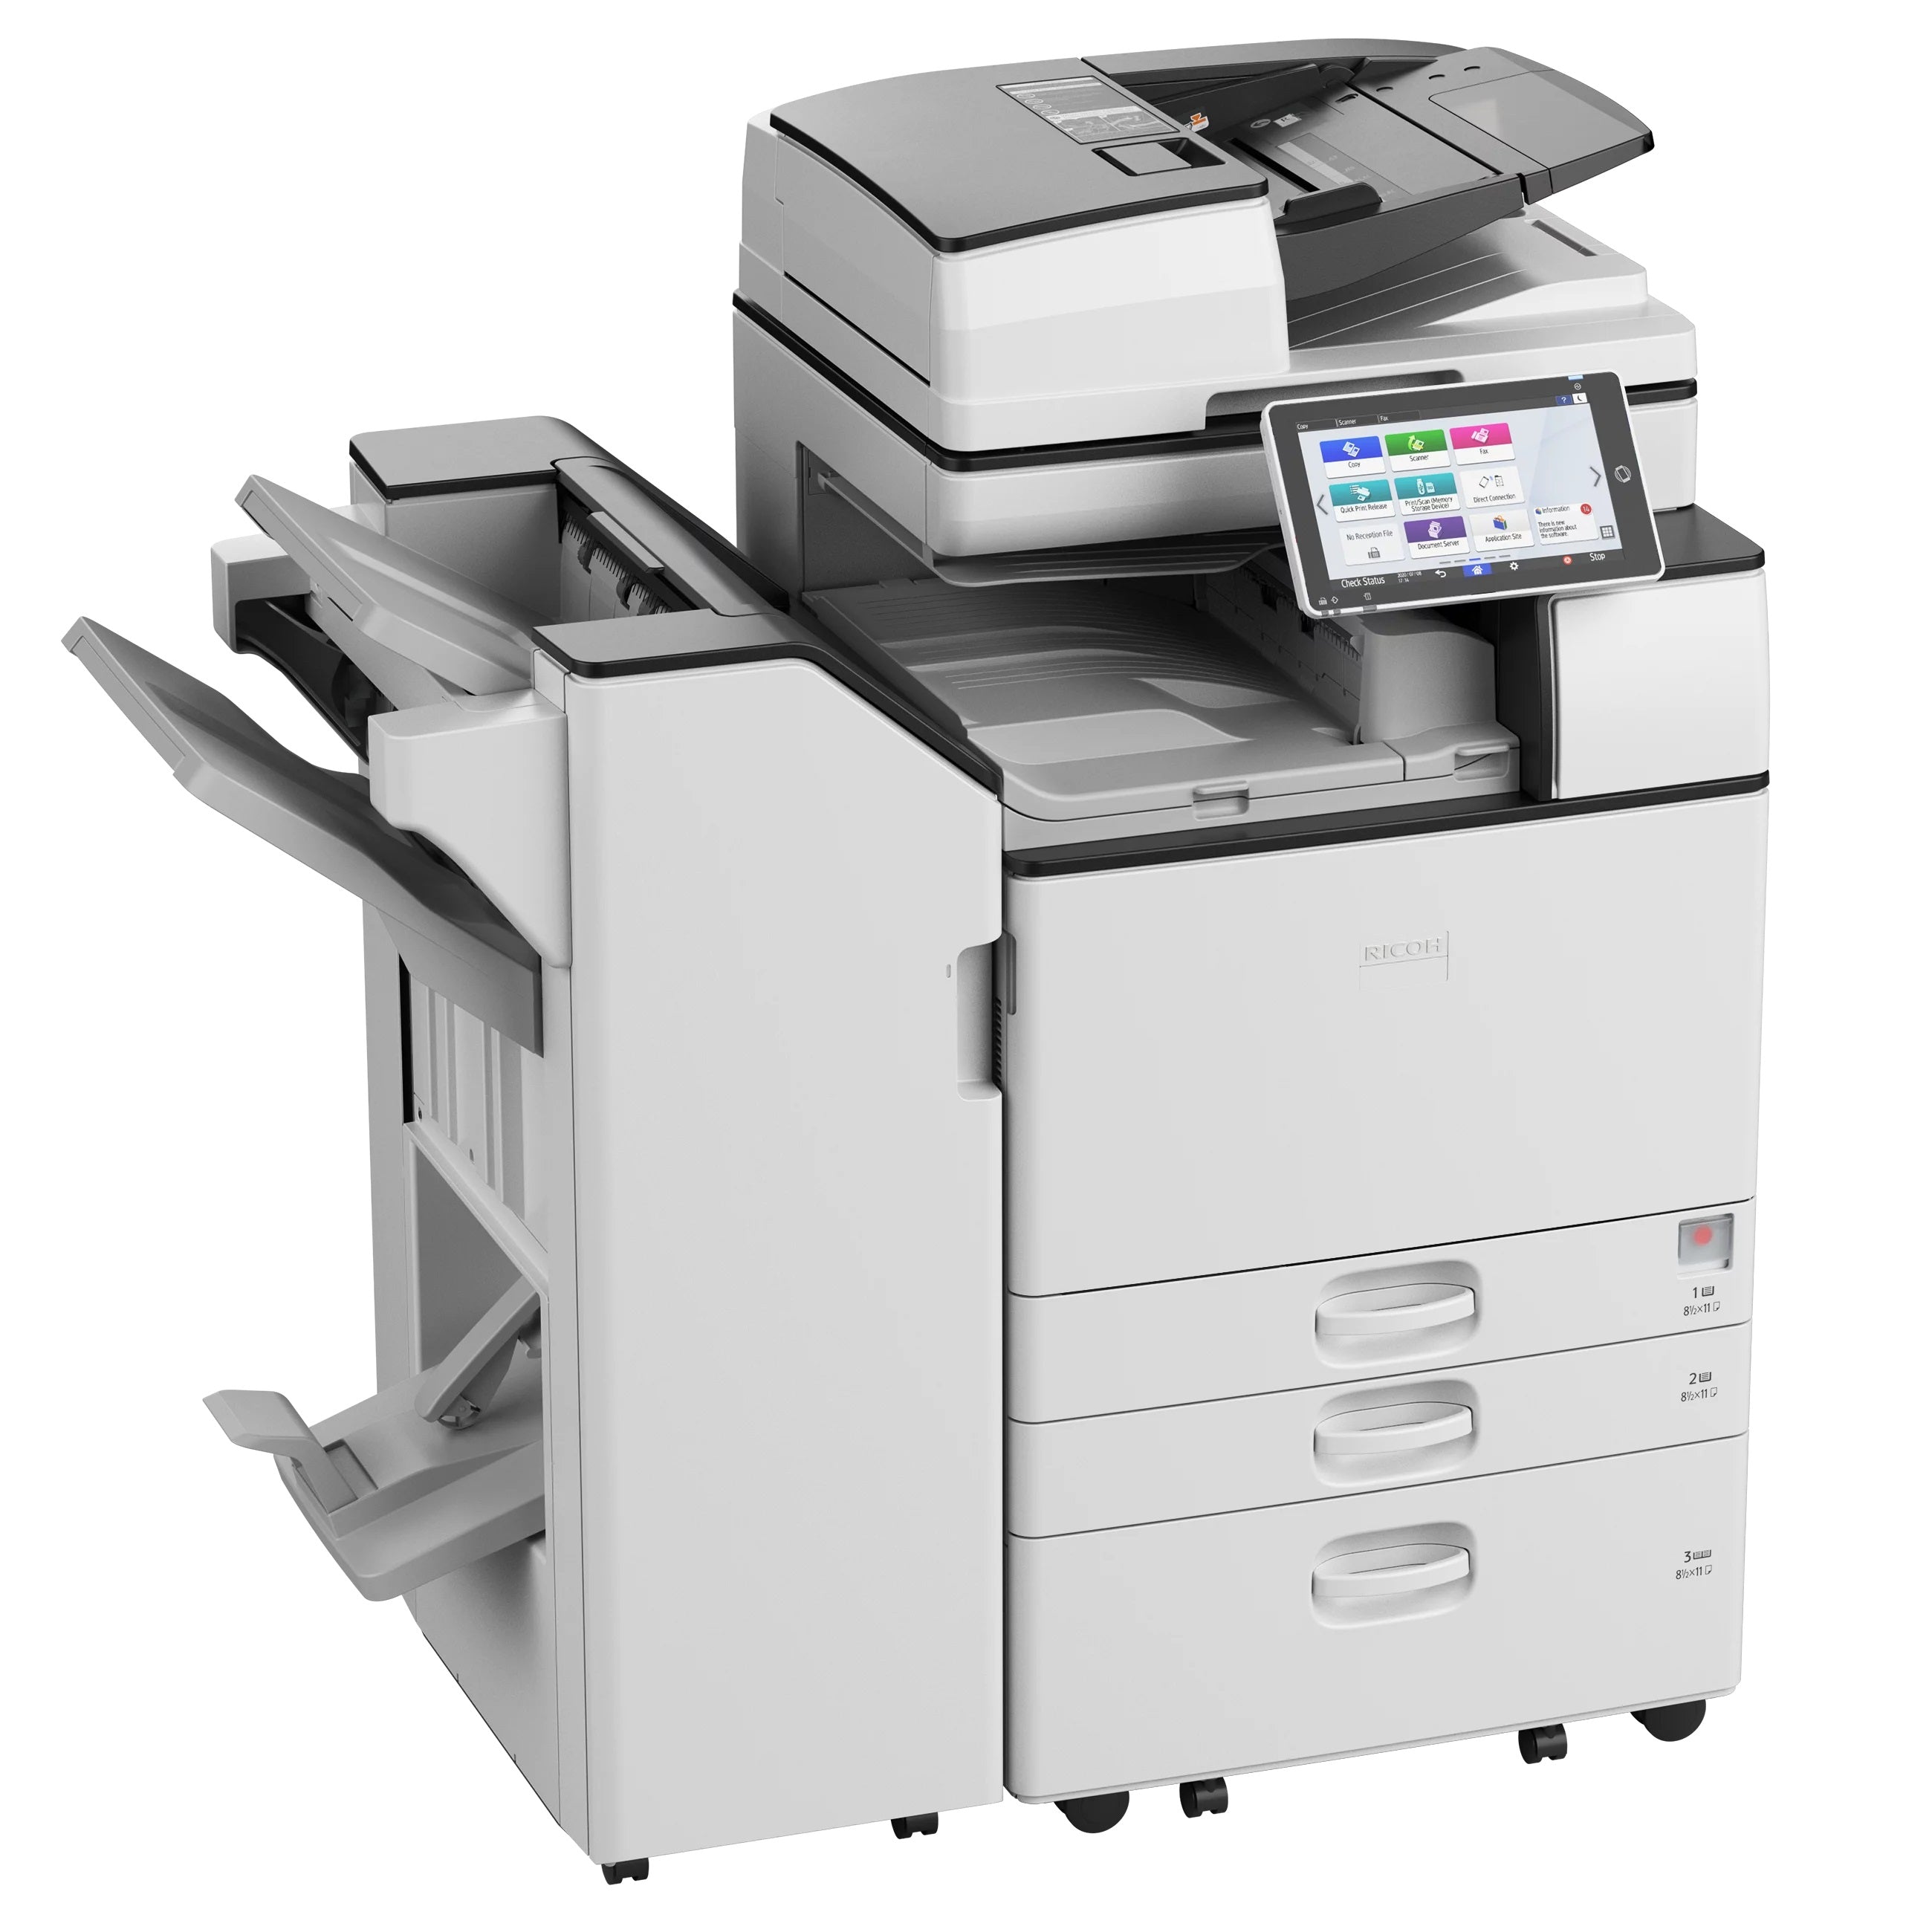 With Powerful Mix Of Features, RICOH IM C2500 (418284) A3 Colour Laser Multifunction Printer For Your Small To Medium-Sized Business - Sustain Productive Performance With The Easy-To-Use